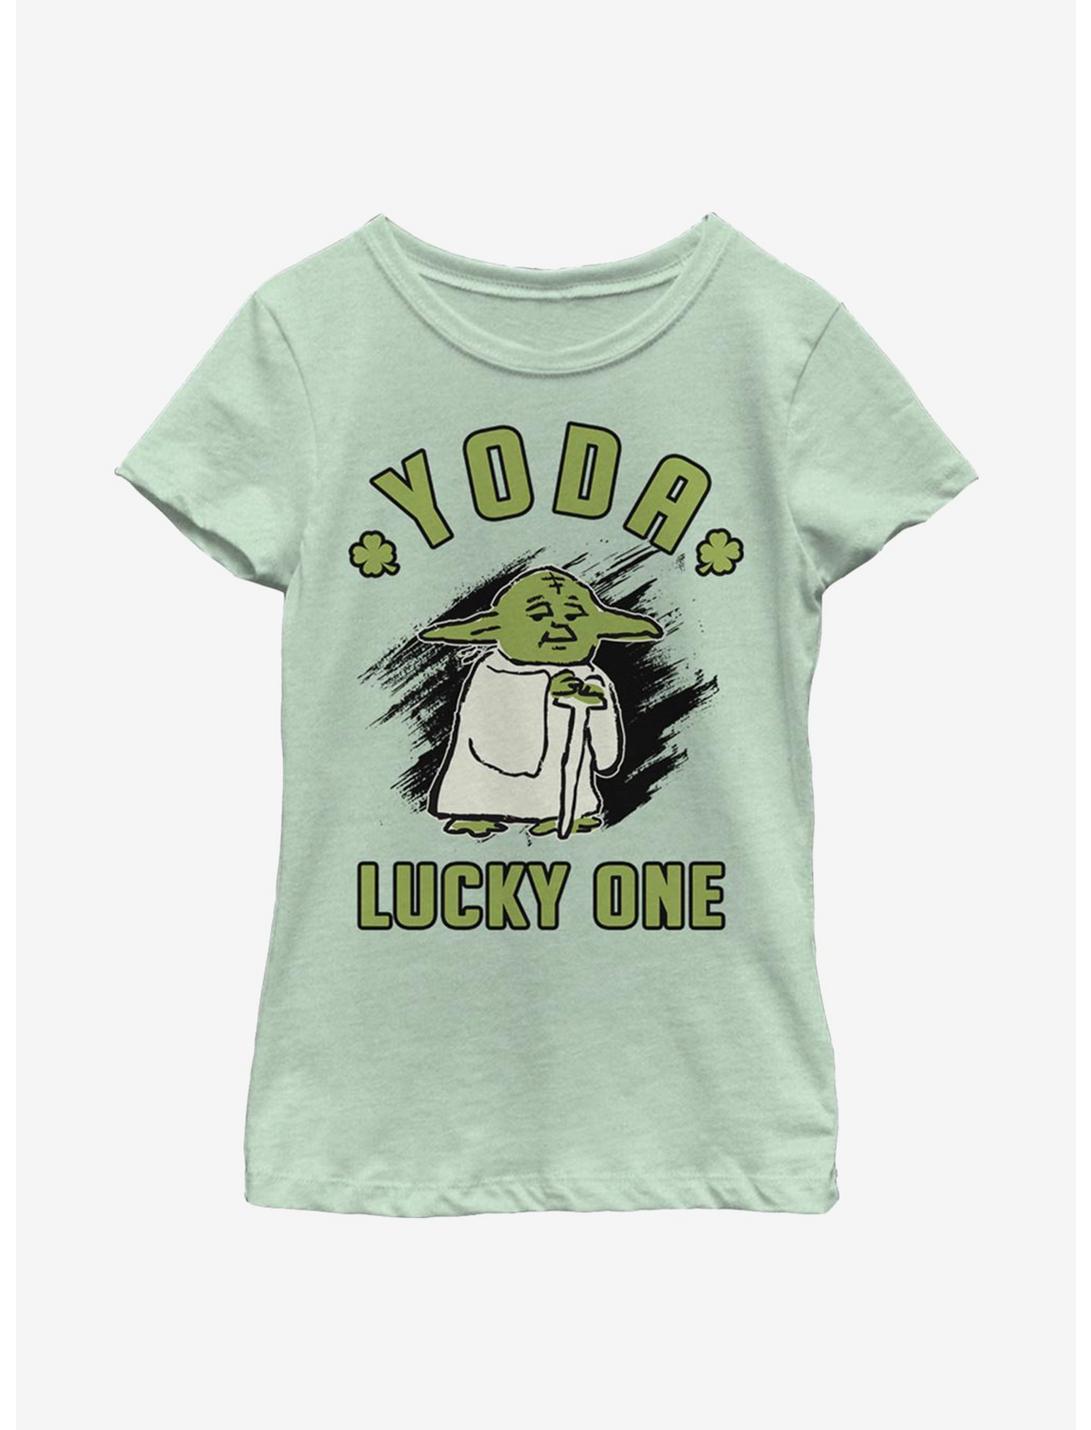 Star Wars Doodle Yoda Lucky Youth Girls T-Shirt, MINT, hi-res